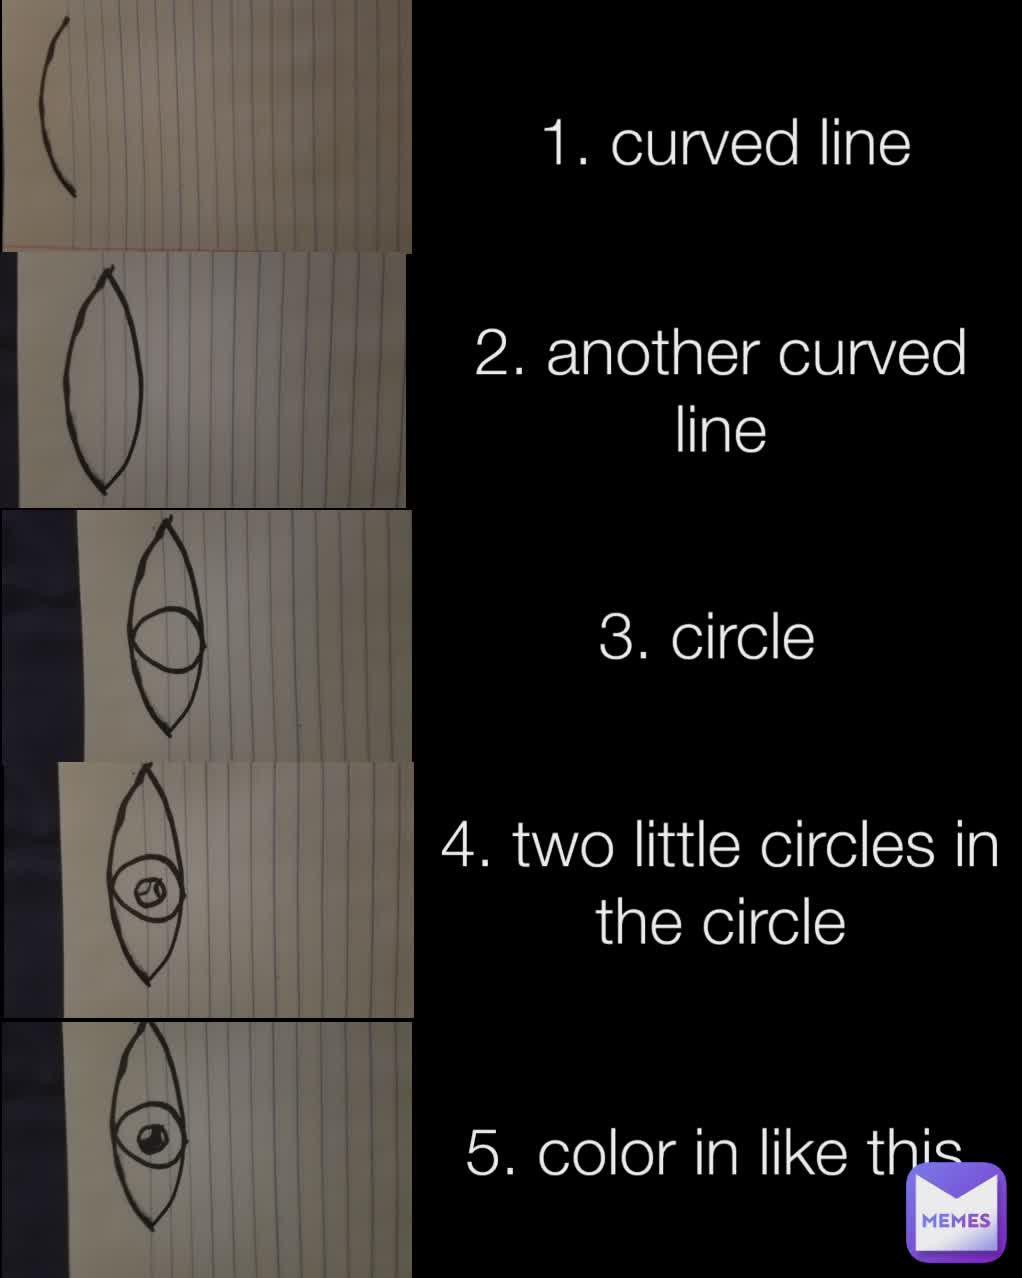 5. color in like this 4. two little circles in the circle 3. circle 2. another curved line 1. curved line